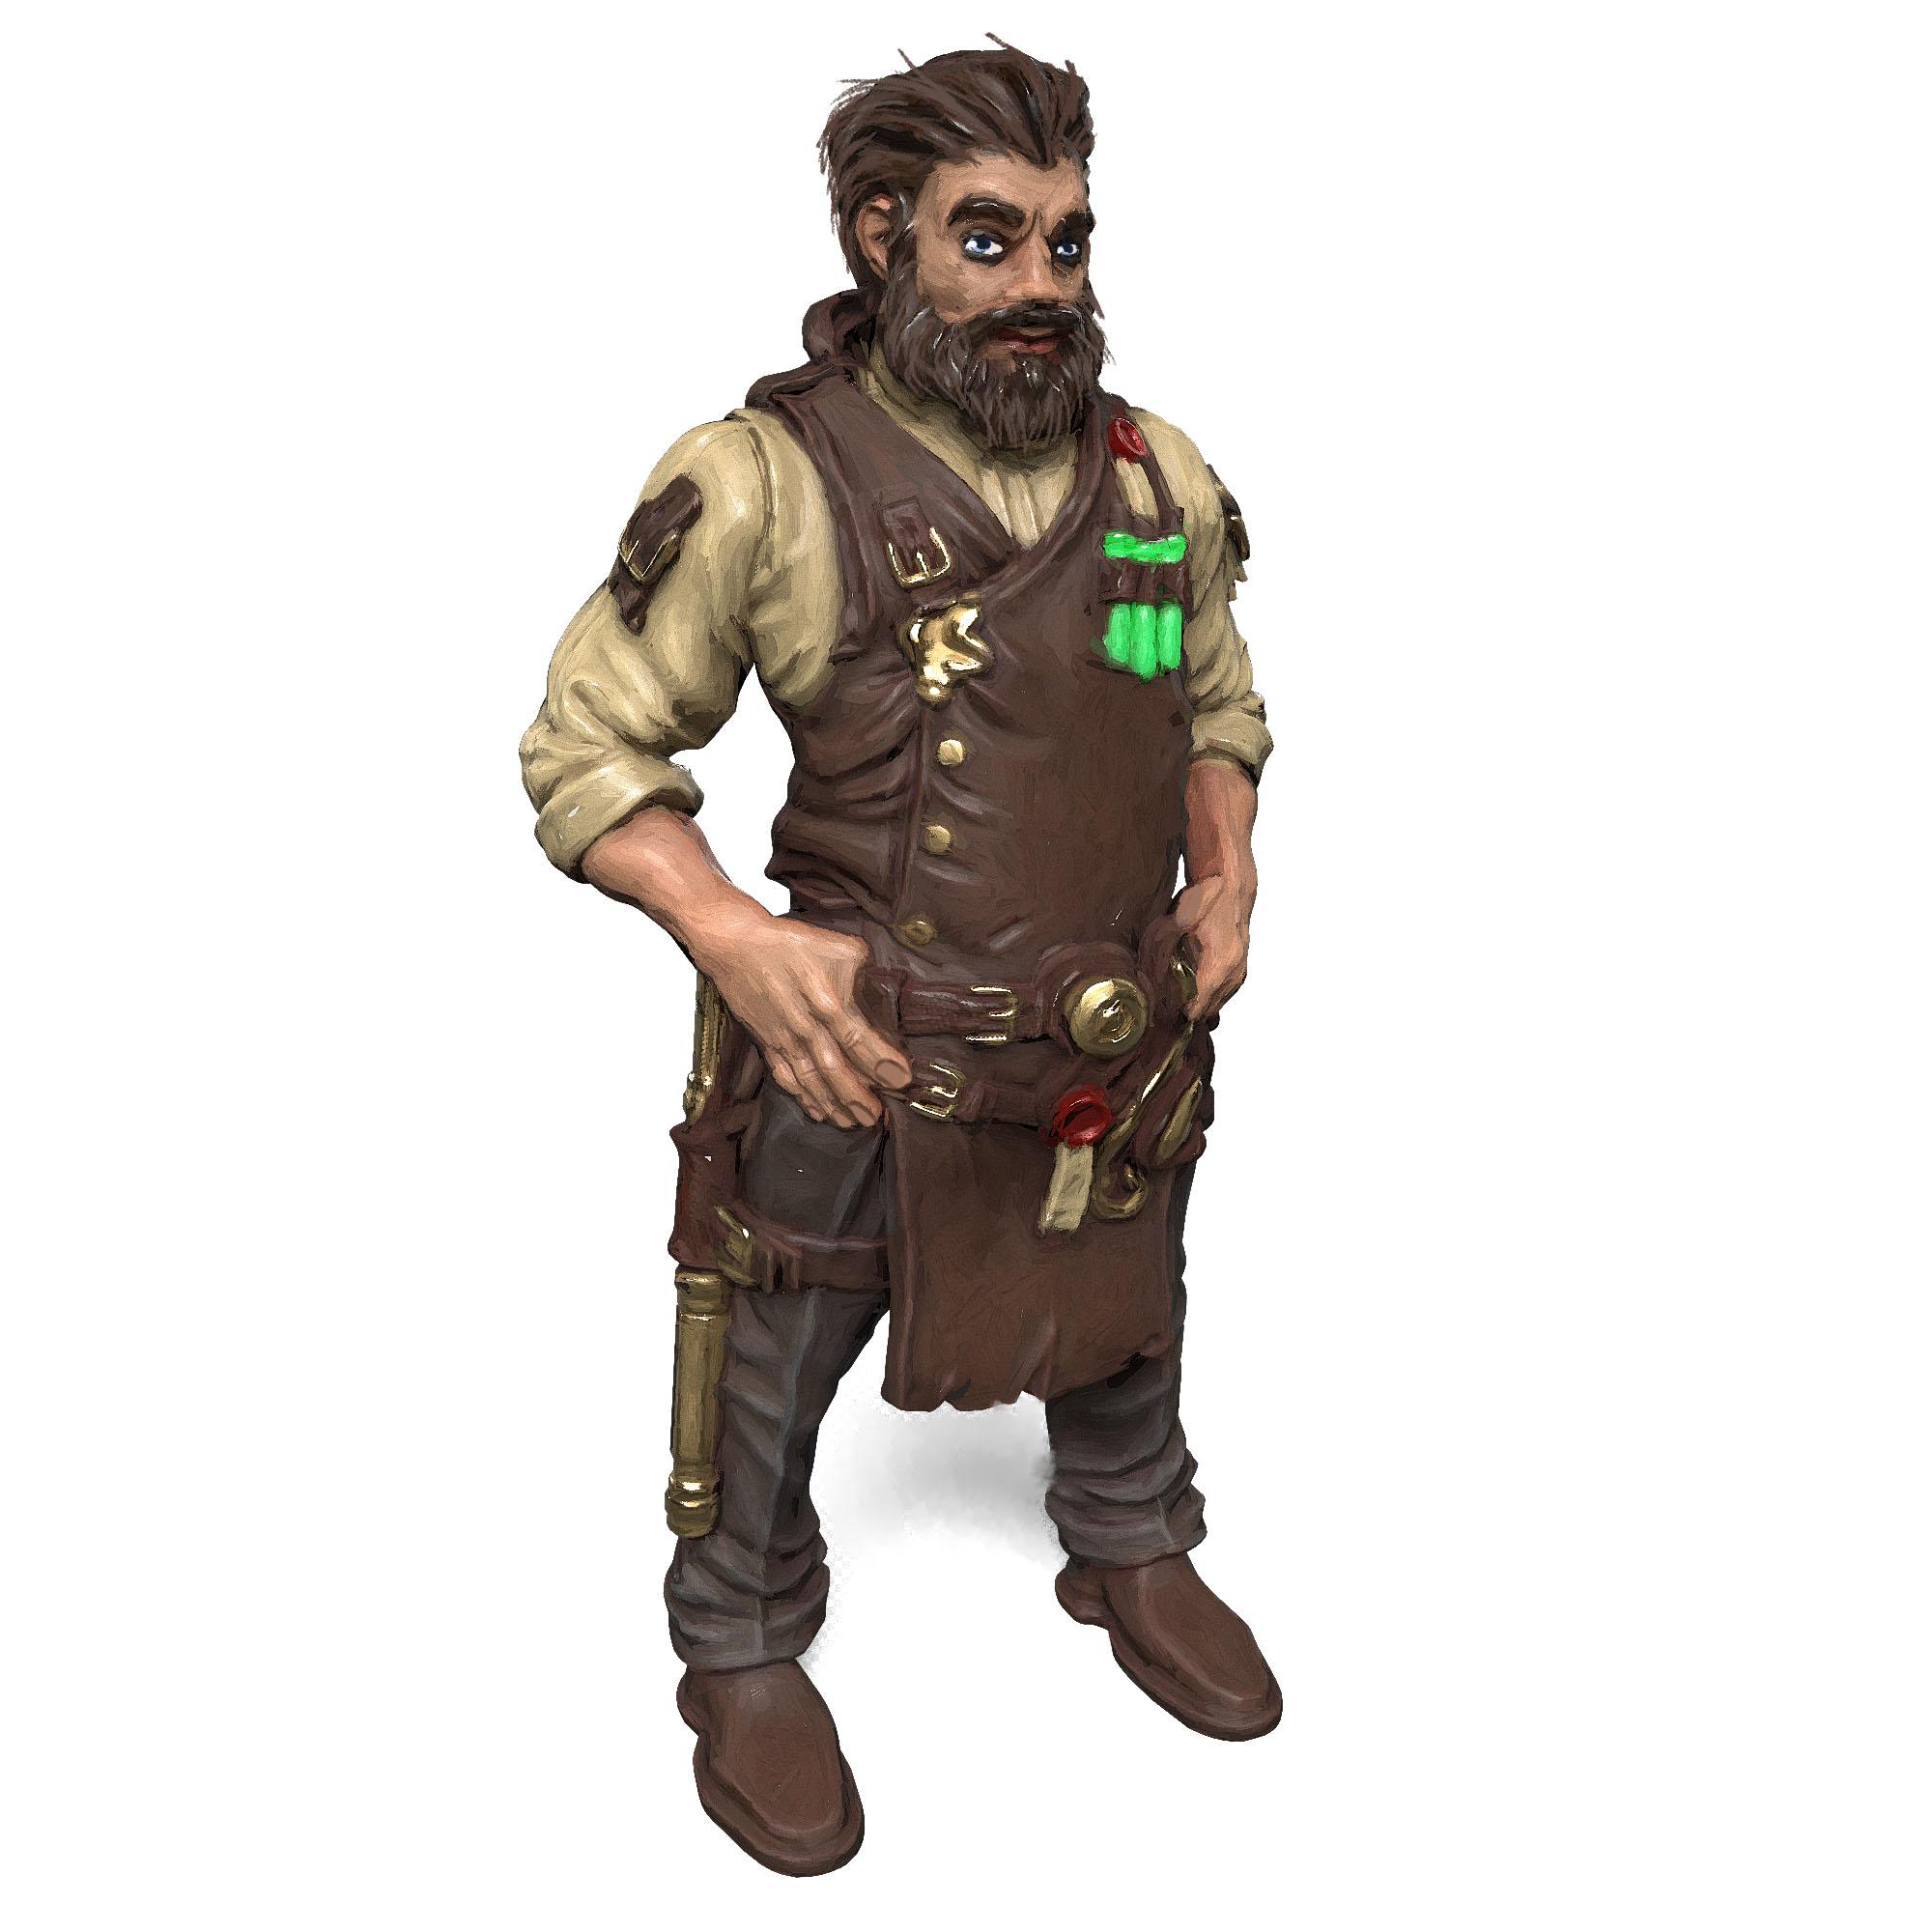 Shop Keeper  - Side Quest Shop - PRESUPPORTED - Illustrated and Stats - 32mm scale			 3d model